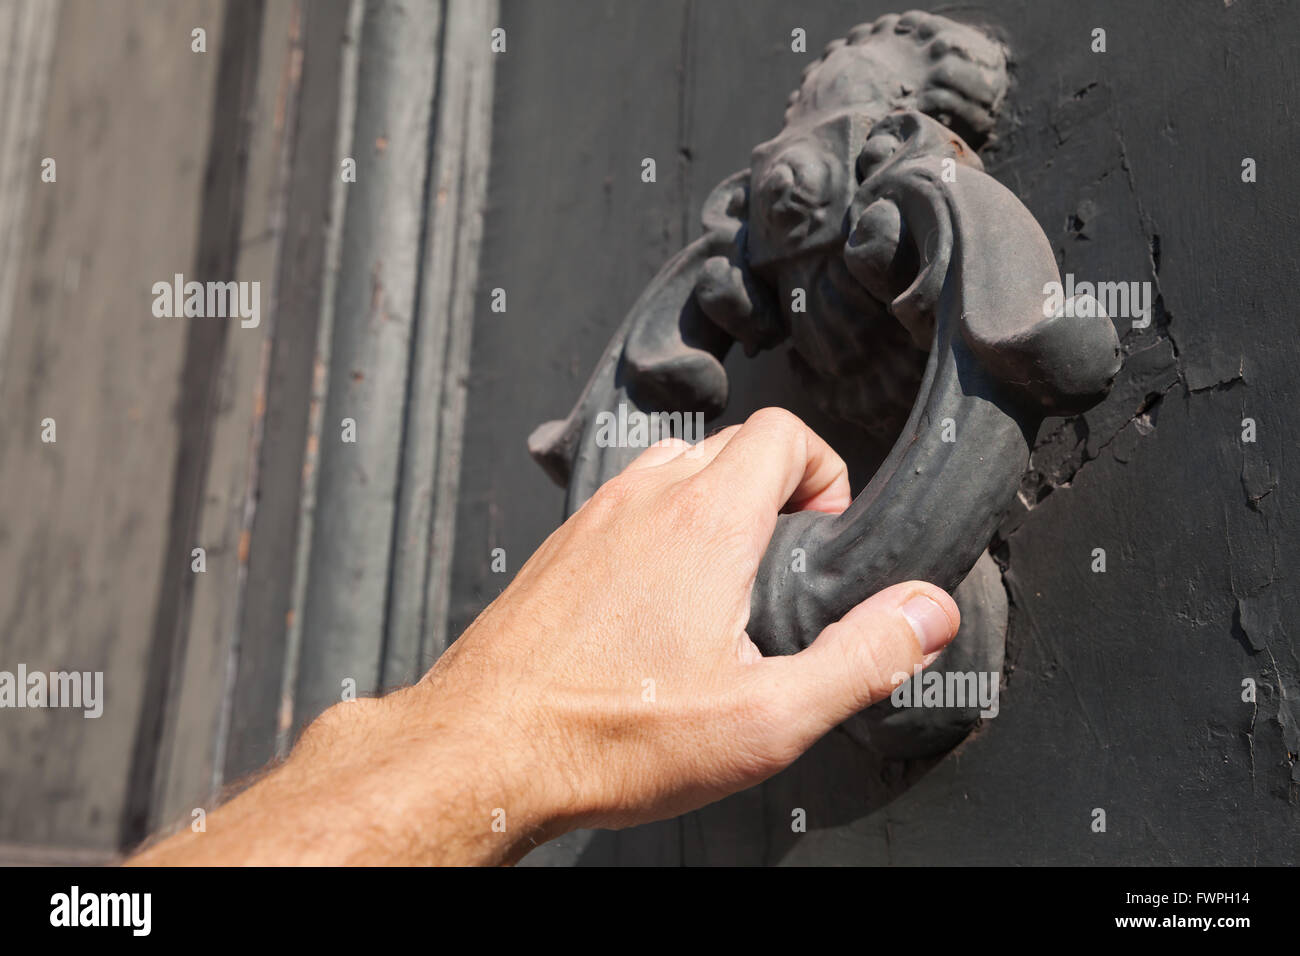 Male hand knocking old black door with metal ring knocker Stock Photo